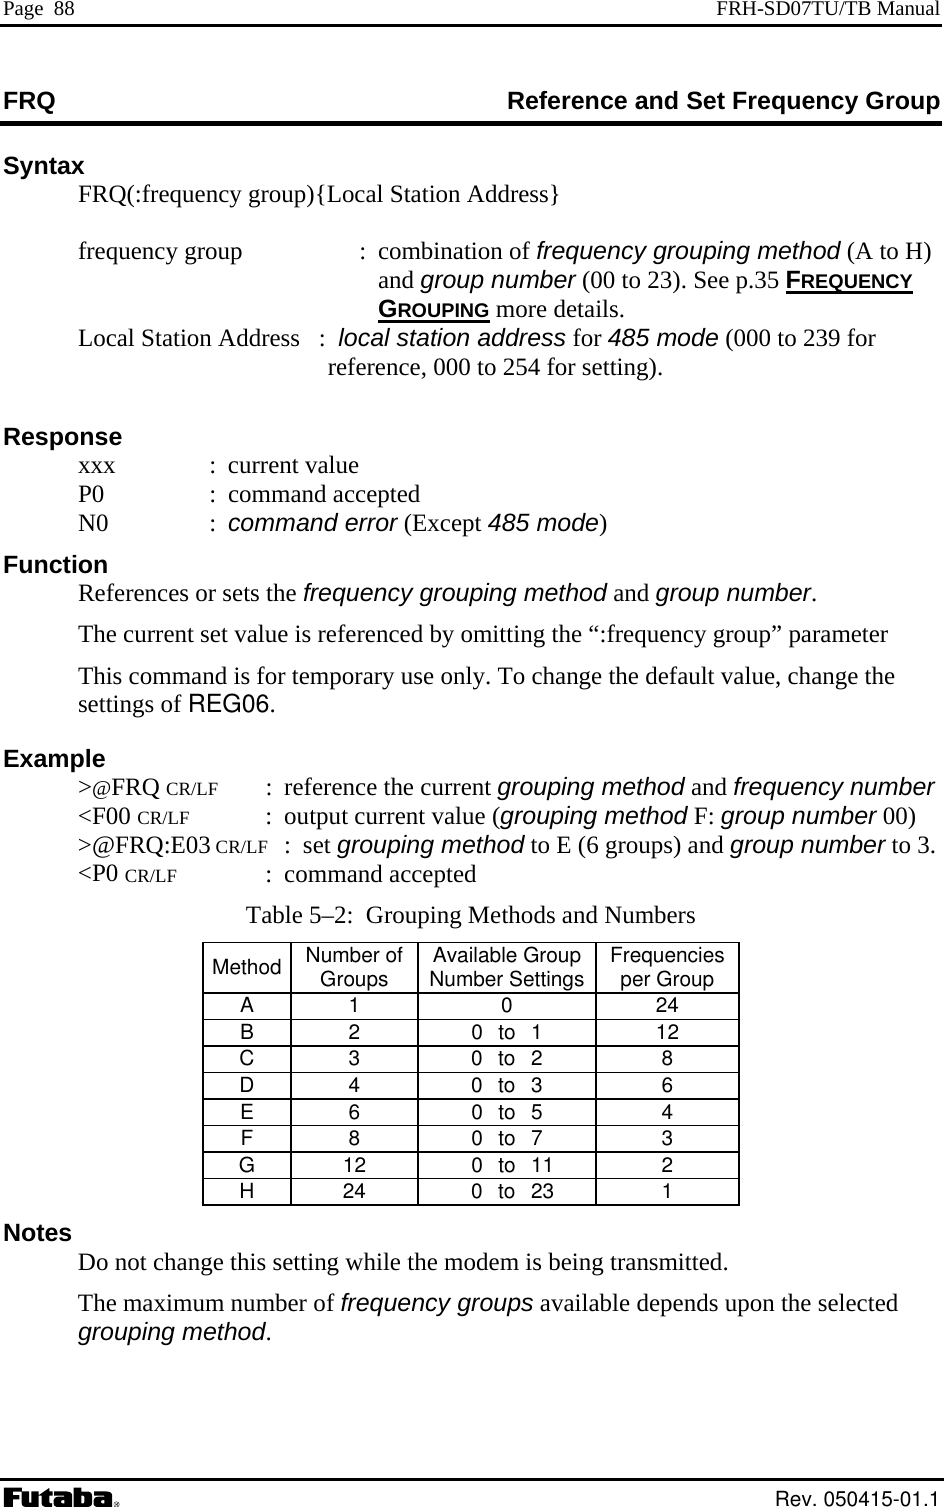 Page  88  FRH-SD07TU/TB Manual FRQ  Reference and Set Frequency Group Syntax  FRQ(:frequency group){Local Station Address}  to H) and group number (00 to 23). See p.35 FREQUENCY    frequency group  :  combination of frequency grouping method (AGROUPING more details.  ress for 485 mode (000 to 239 for 4 for setting).  Function    “:frequency group” parameter  command is for temporary use only. To change the default value, change the  : referen od and frequency number F00 CR/LF  :  output current value (grouping method F: group number 00)  group number to 3. Method  Number of  Available Group  Frequencies per Group    Local Station Address   :  local station adde, 000 to 25referenc Response  xxx  : current value P0  : command accepted  N0  : command error (Except 485 mode)   References or sets the frequency grouping method and group number. The current set value is referenced by omitting the  Thissettings of REG06. Example  &gt;@FRQ CR/LF ce the current grouping meth &lt; &gt;@FRQ:E03 CR/LF : set grouping method to E (6 groups) and &lt;P0 CR/LF : command accepted Table 5–2:  Grouping Methods and Numbers Groups  Number SettingsA 1  0 24 B 2  0 to 1  12 C 3  0 to 2  8 D 4  0 to 3  6 E 6  0 to 5  4 F 8  0 to 7  3 G 12  0 to 11  2 H 24  0 to 23  1 Notes   Do not change this setting while the modem is being transmitted.   The maximum number of frequency groups available depends upon the selected grouping method.  Rev. 050415-01.1 